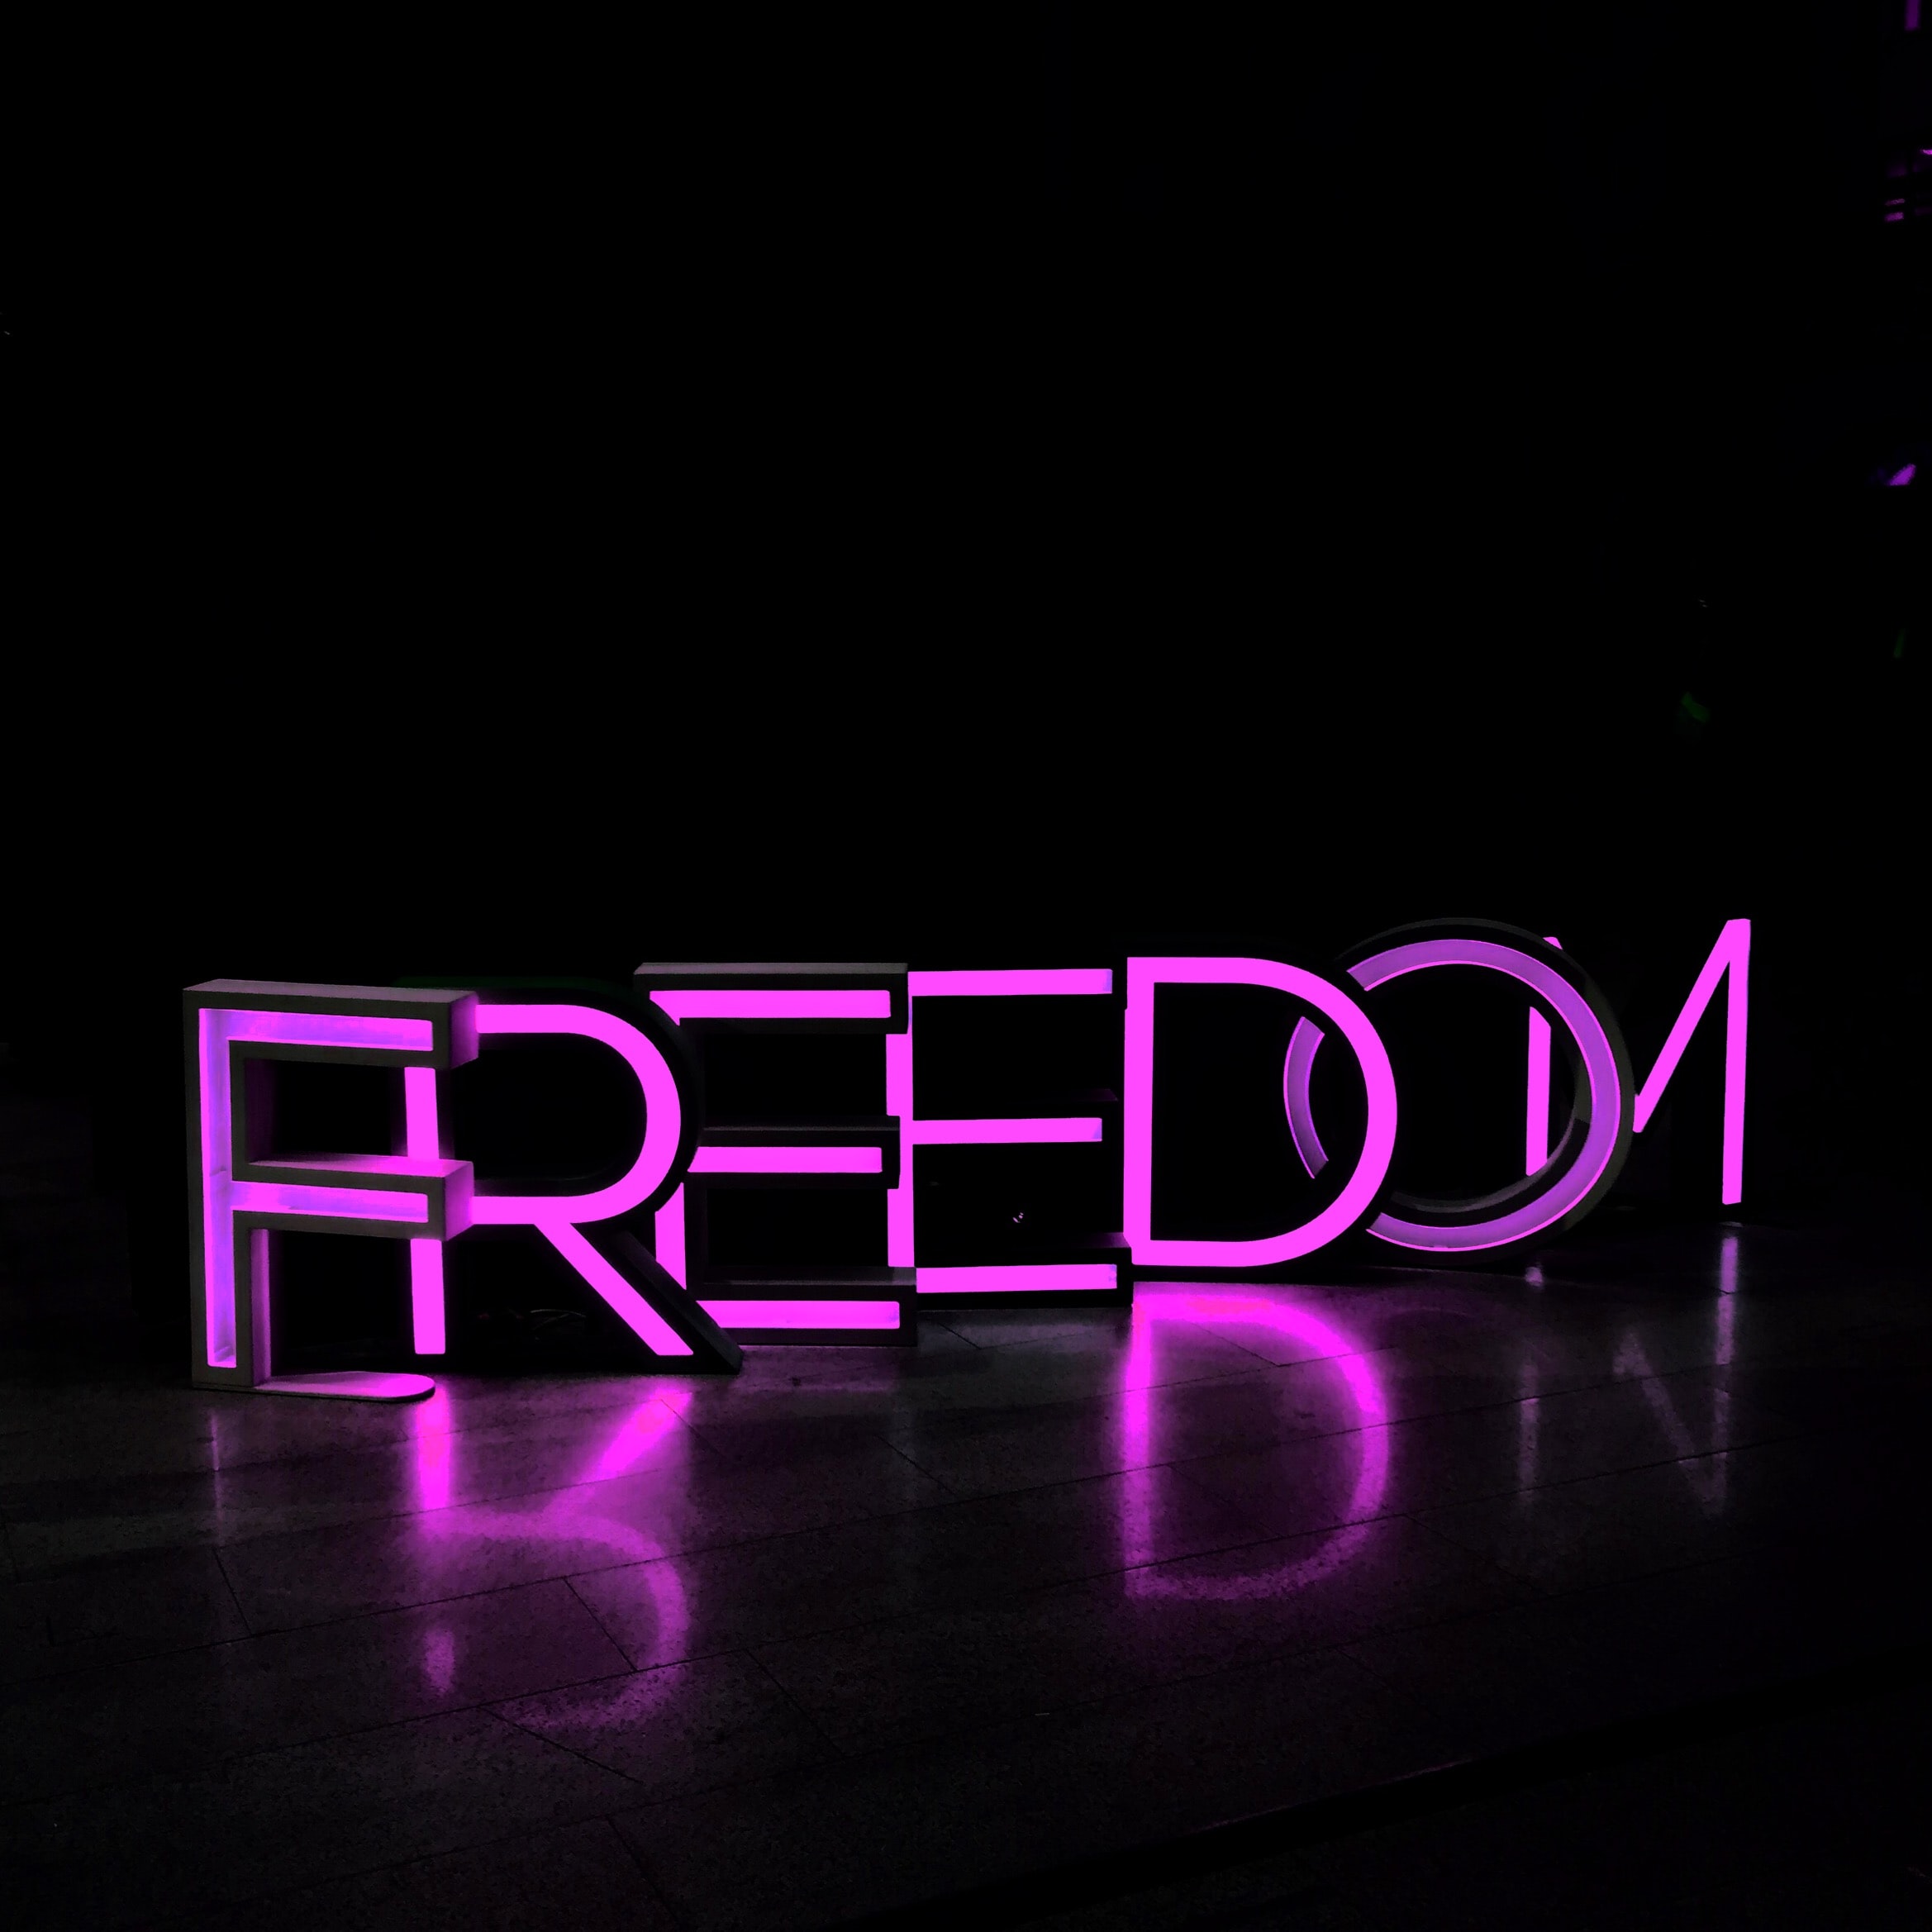 A capitalised sign lights up in neon pink/purple, spelling out the word FREEDOM.